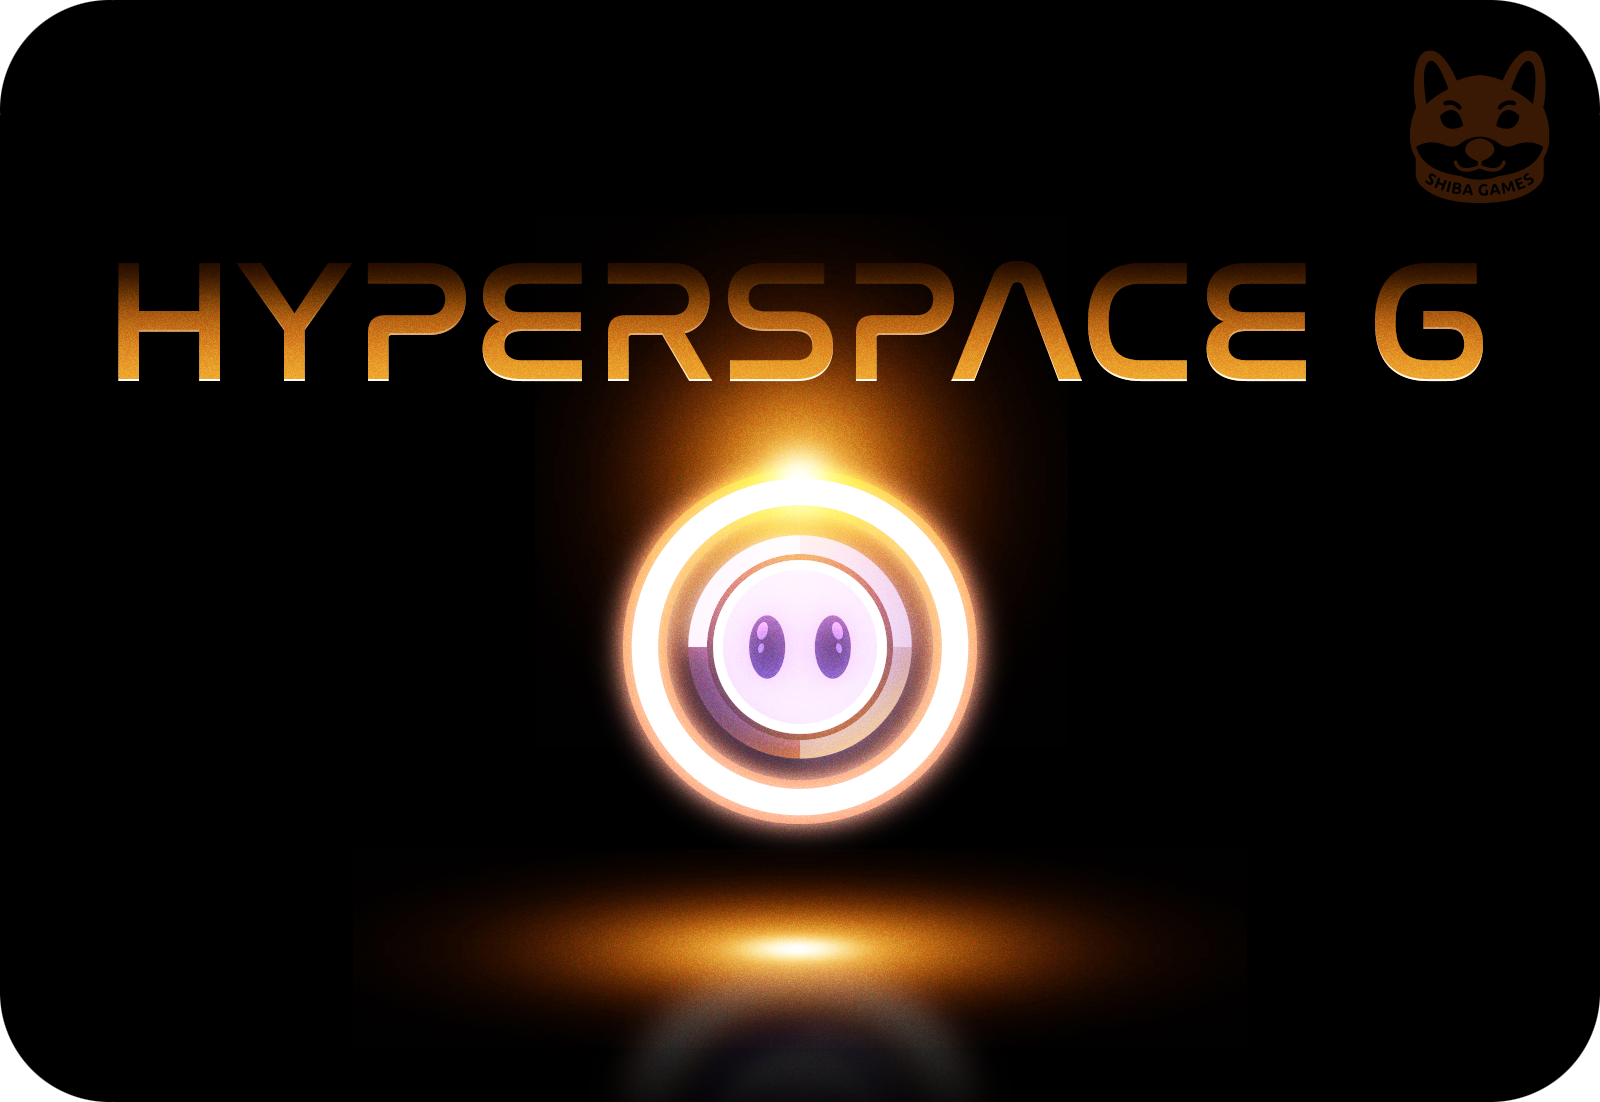 Hyperspace G